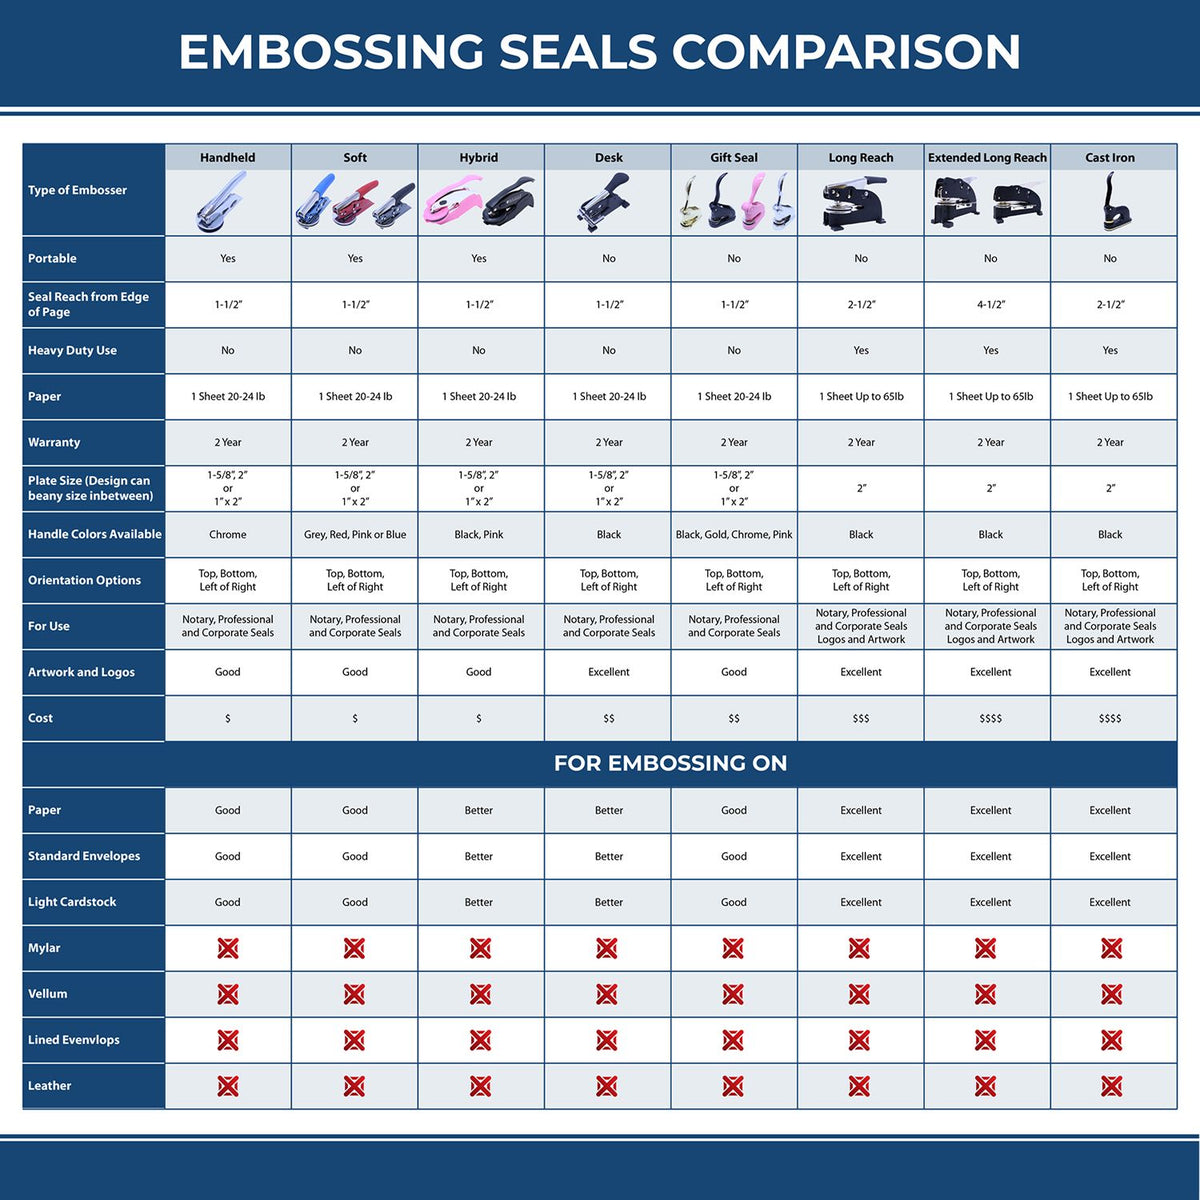 A comparison chart for the different types of mount models available for the Soft Mississippi Professional Geologist Seal